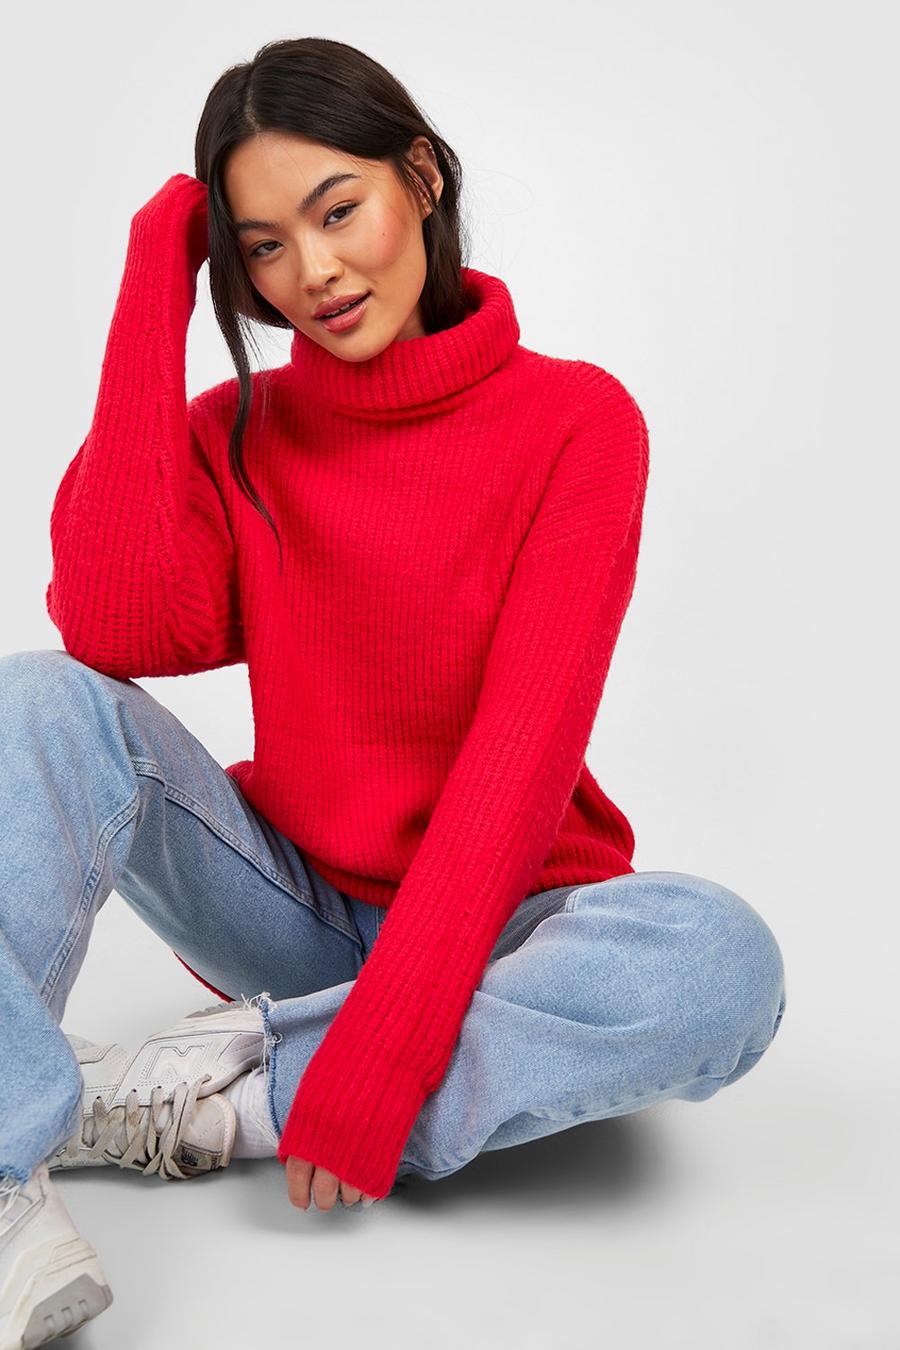 Red knitted jumper